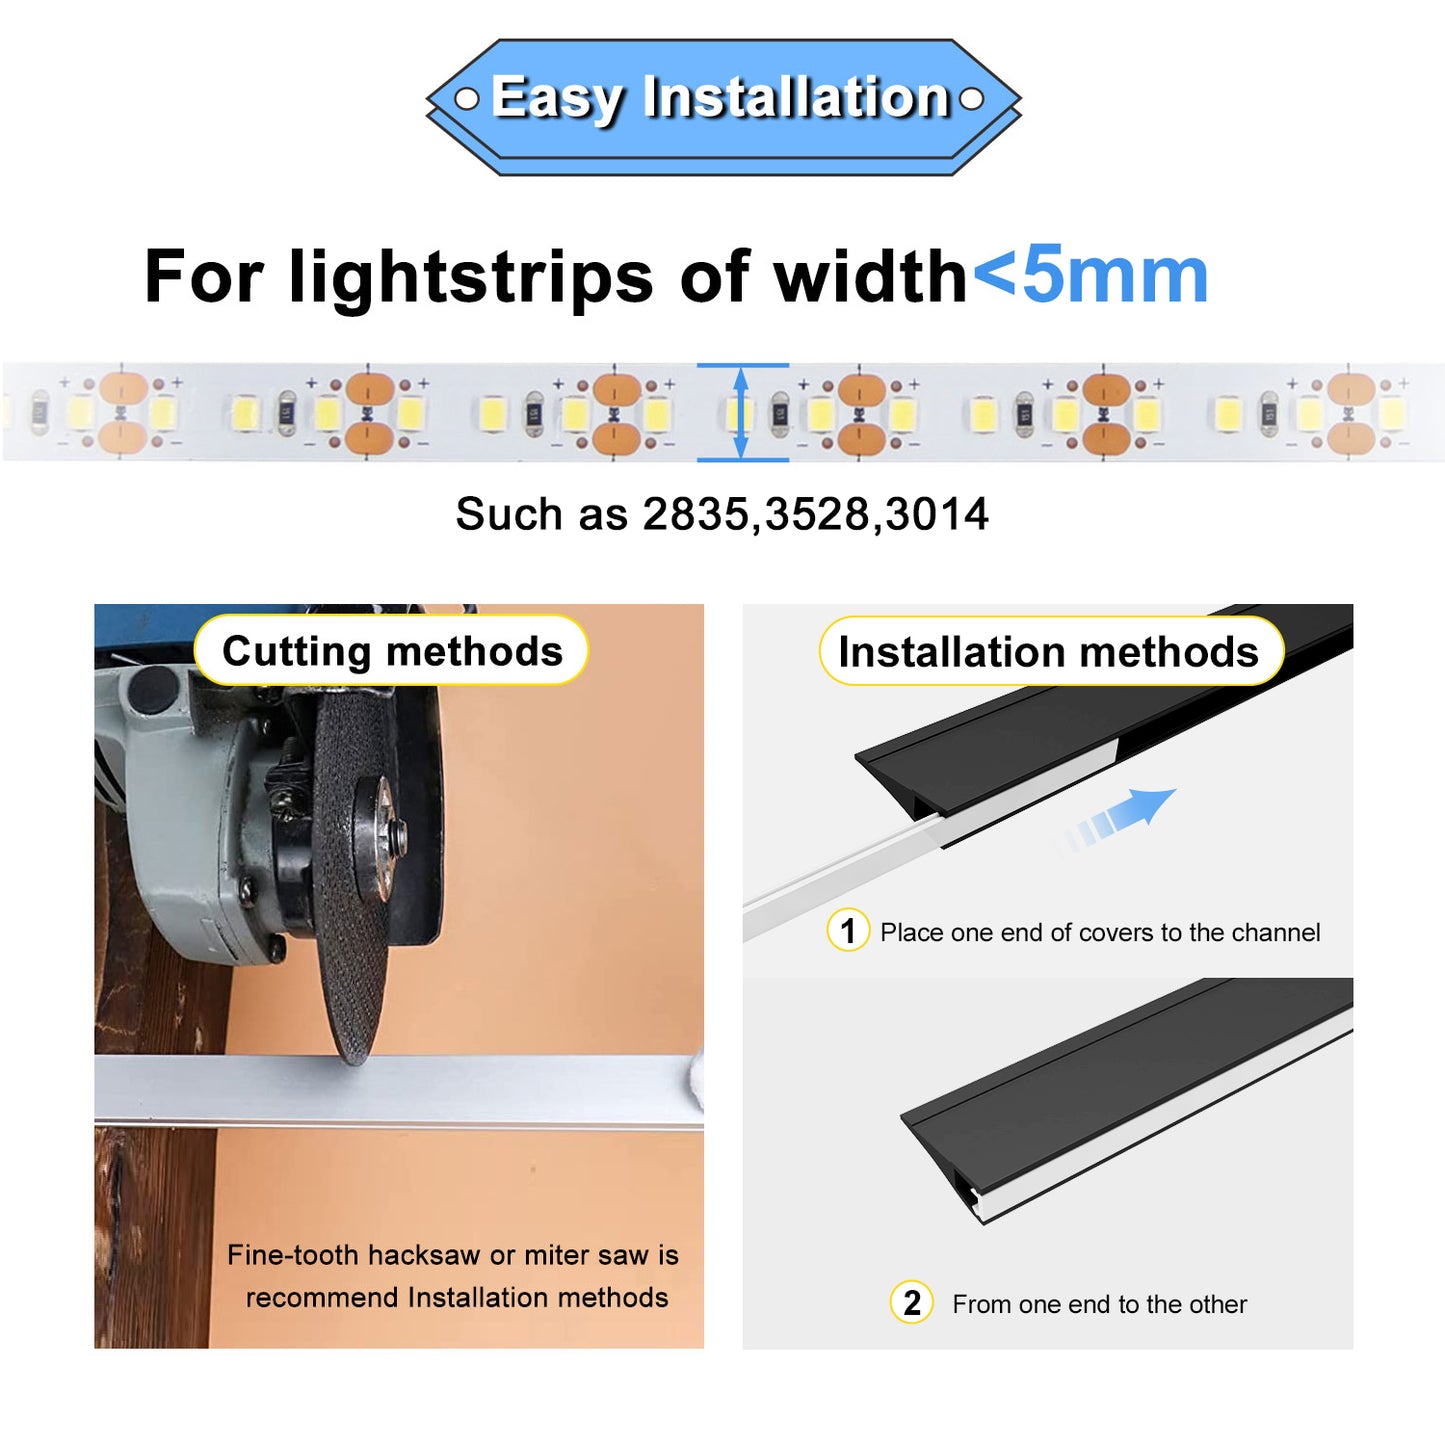 Send an inquiry for Ultra Thin LED Light Extrusion AL6063 Adhesive Triangle Aluminum Profile to high quality LED Light Extrusion supplier. Wholesale Aluminum Profile directly from China LED Light Extrusion manufacturers/exporters. Get a factory sale price list and become a distributor/agent-vstled.com